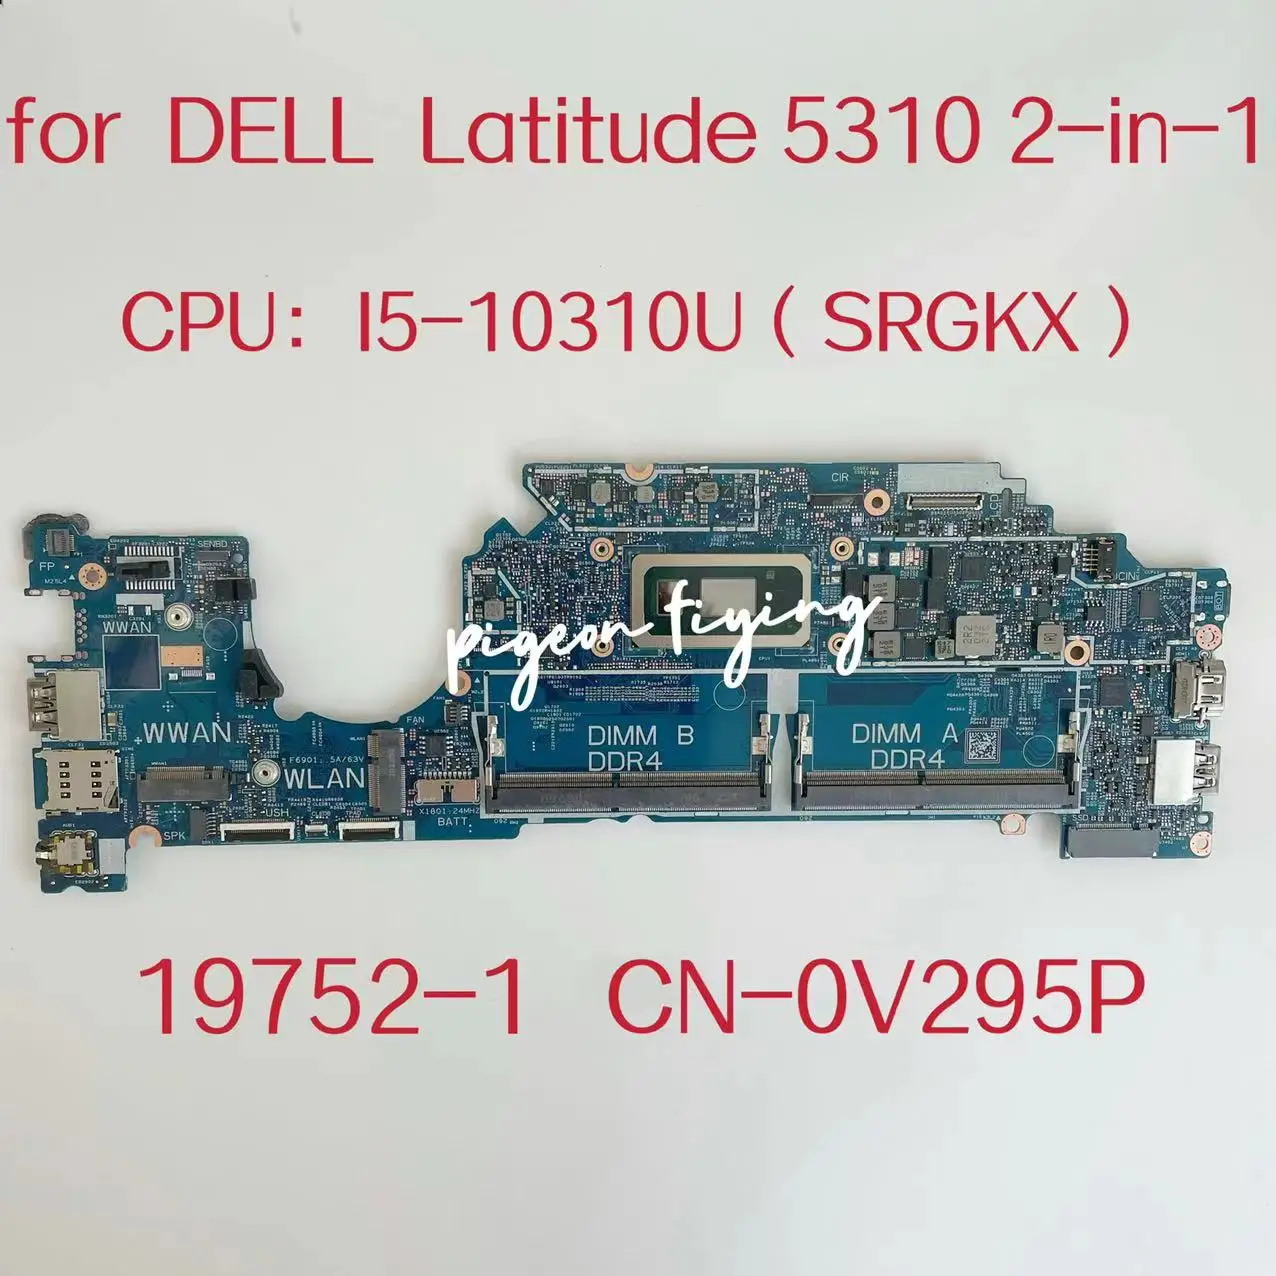 

19752-1 Mainboard For Dell Latitude 5310 2-in-1 Laptop Motherboard CPU:I5-10310U SRGKX DDR4 CN-0V295P 0V295P V295P Test OK